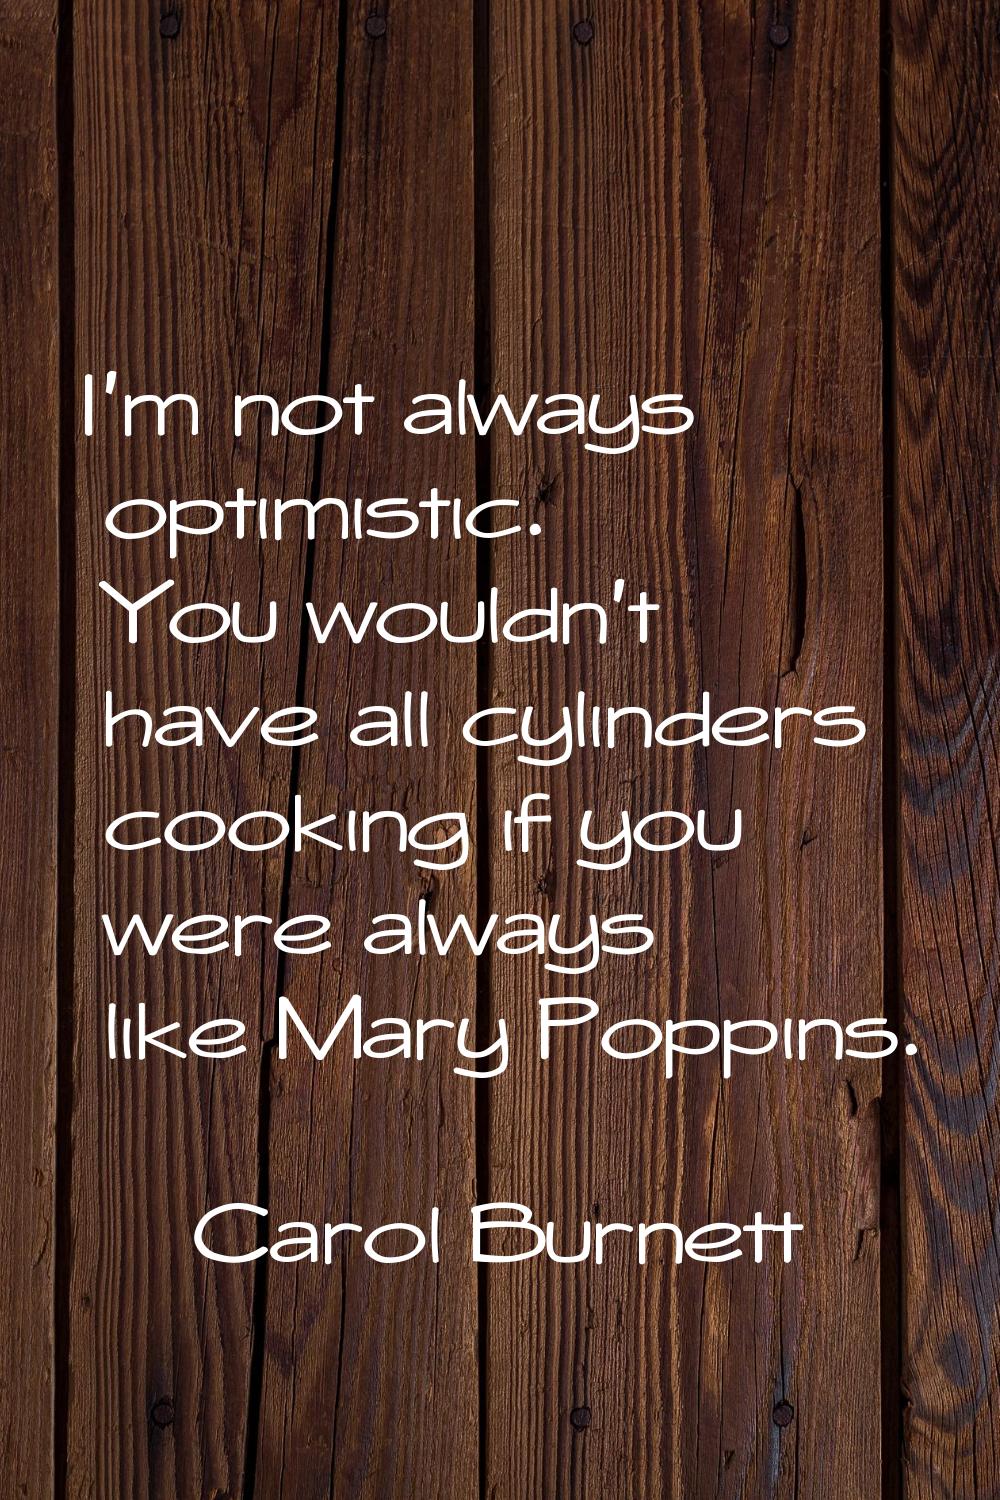 I'm not always optimistic. You wouldn't have all cylinders cooking if you were always like Mary Pop